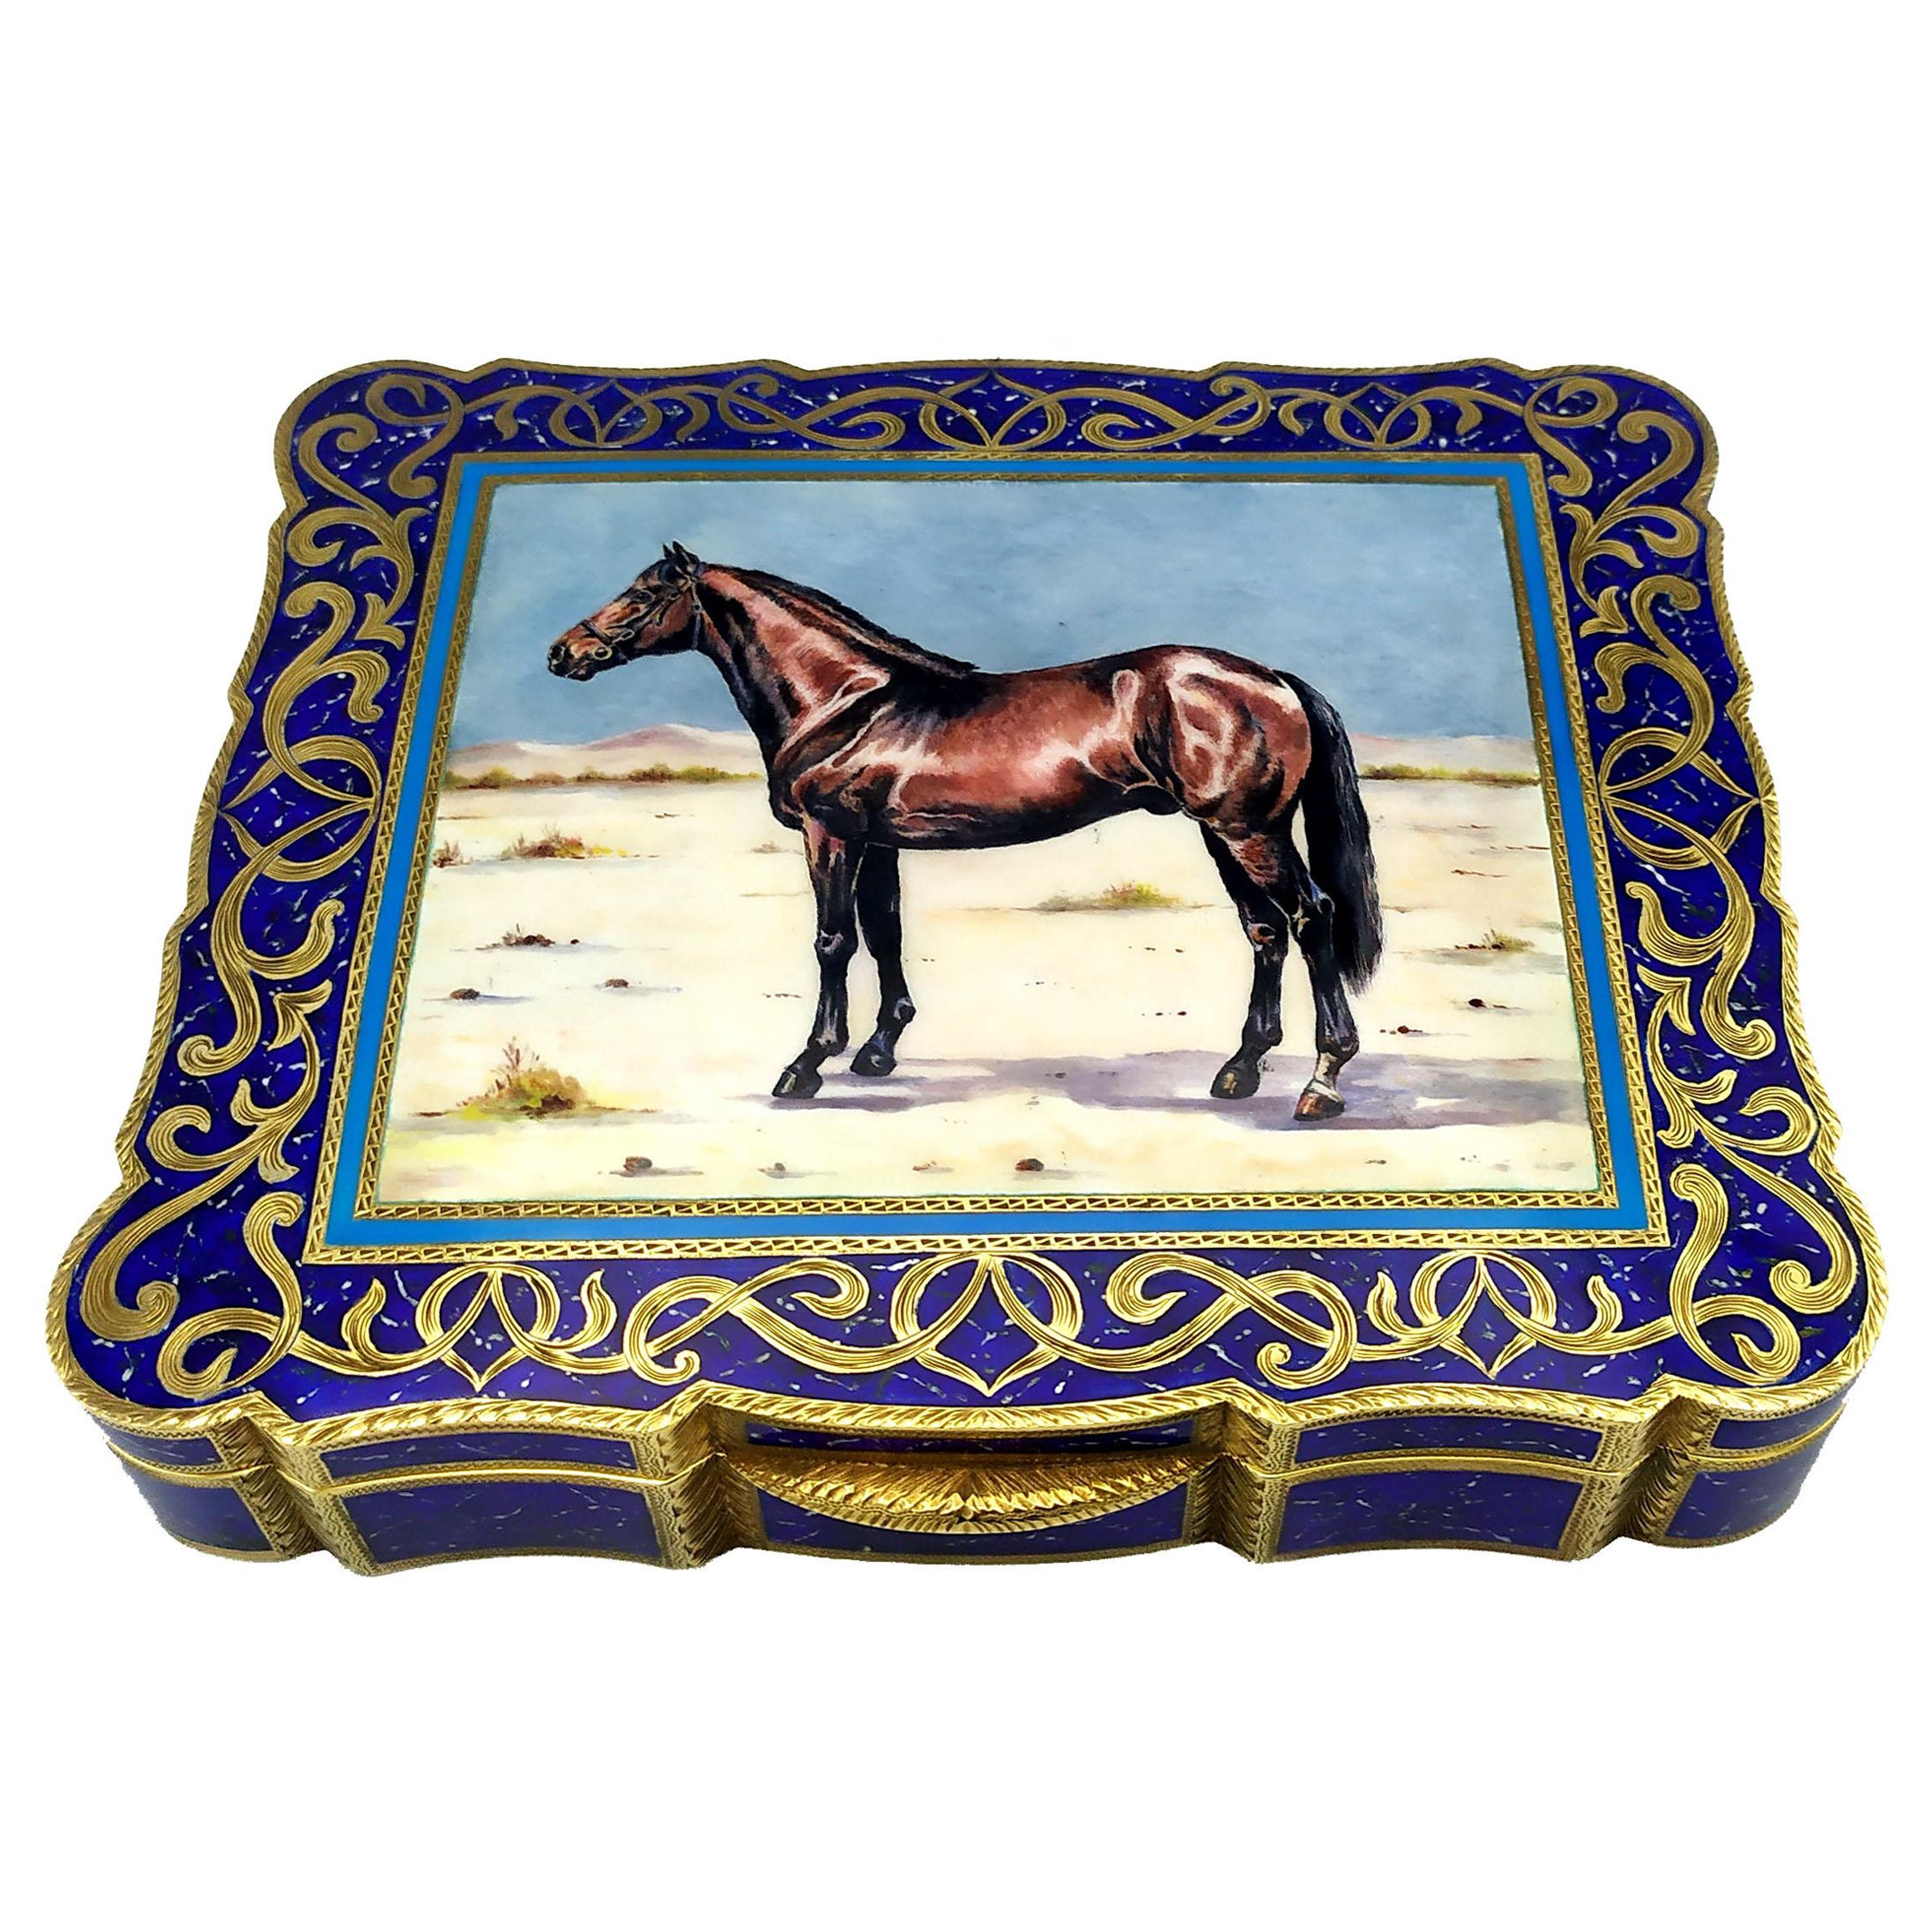 Table Box Magnificent Arabian Horse Fired Enamel Sterling Silver Salimbeni For Sale